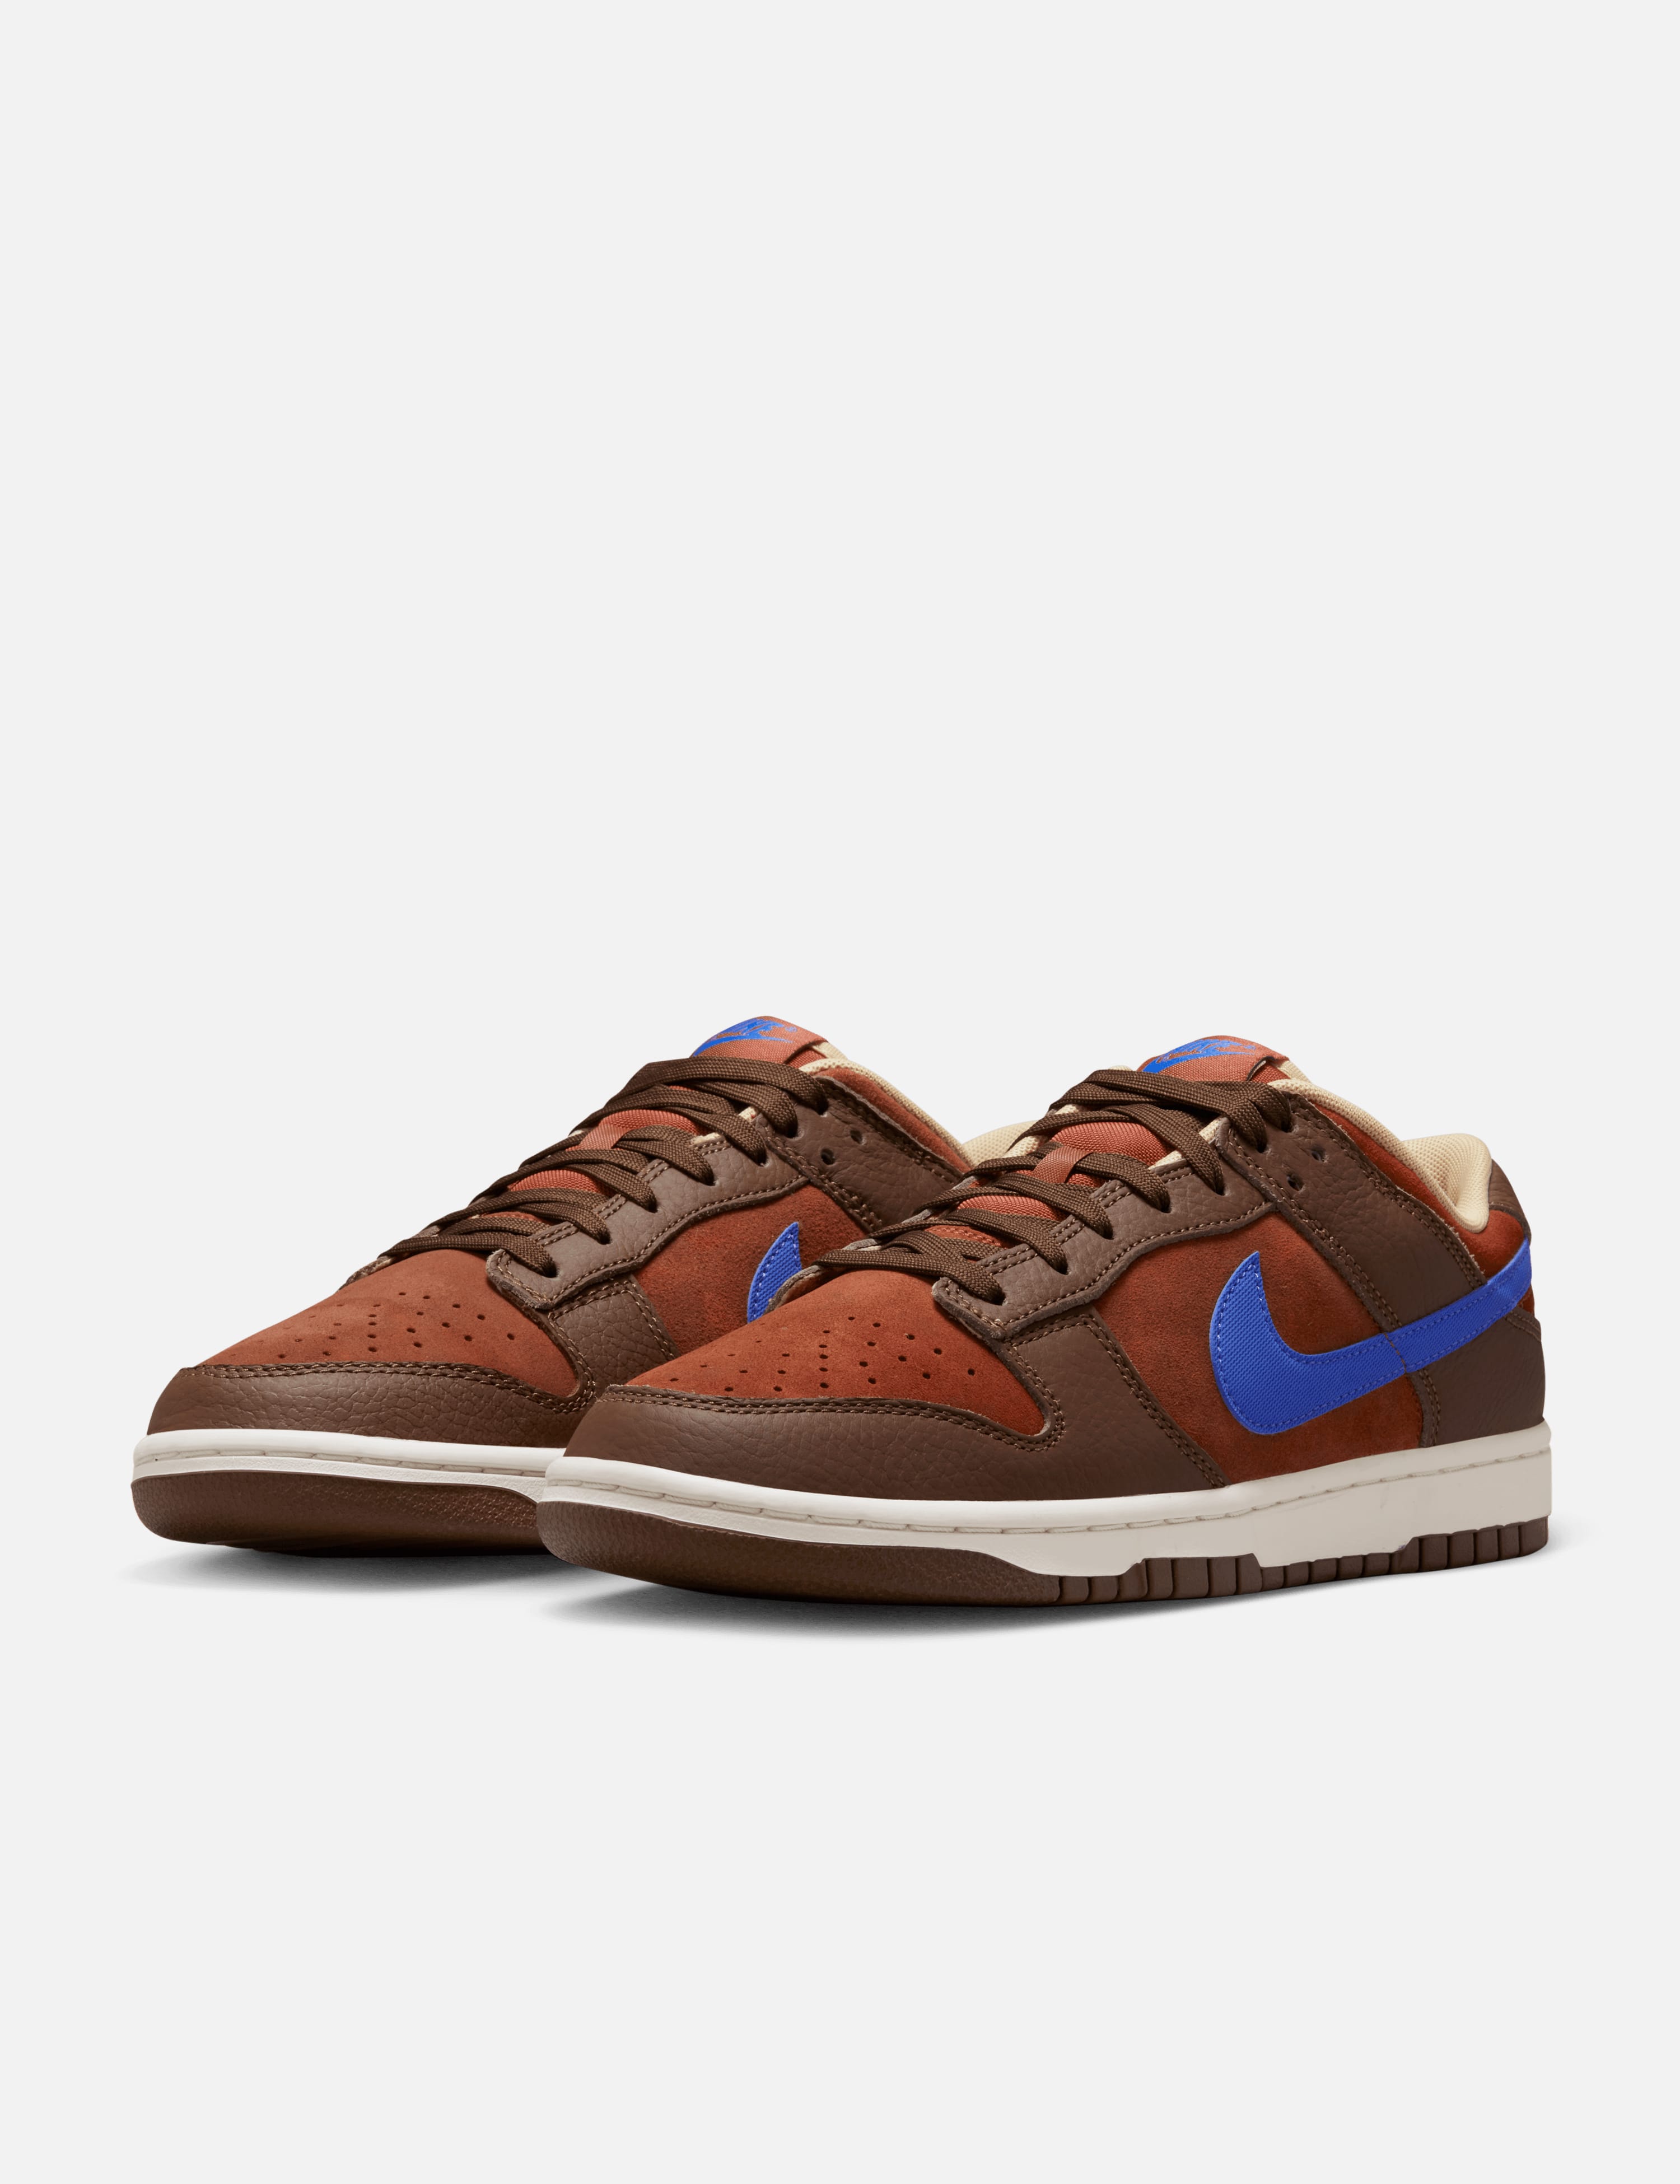 Nike   Nike Dunk Low Retro PRM   HBX   Globally Curated